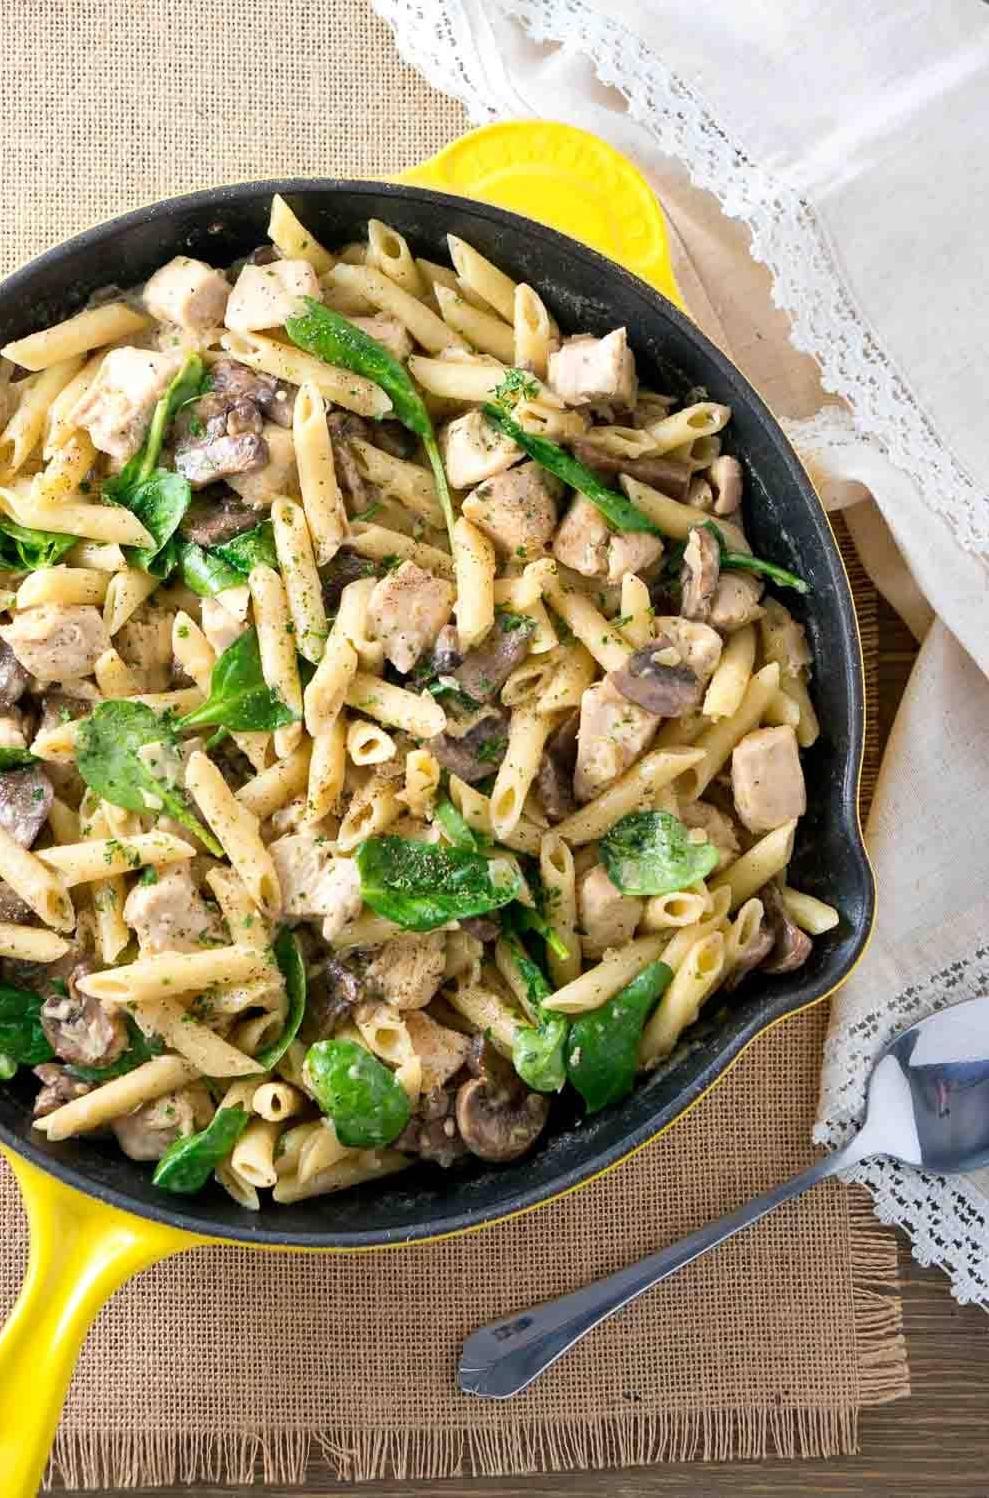  This pasta dish is the perfect balance of richness and freshness.